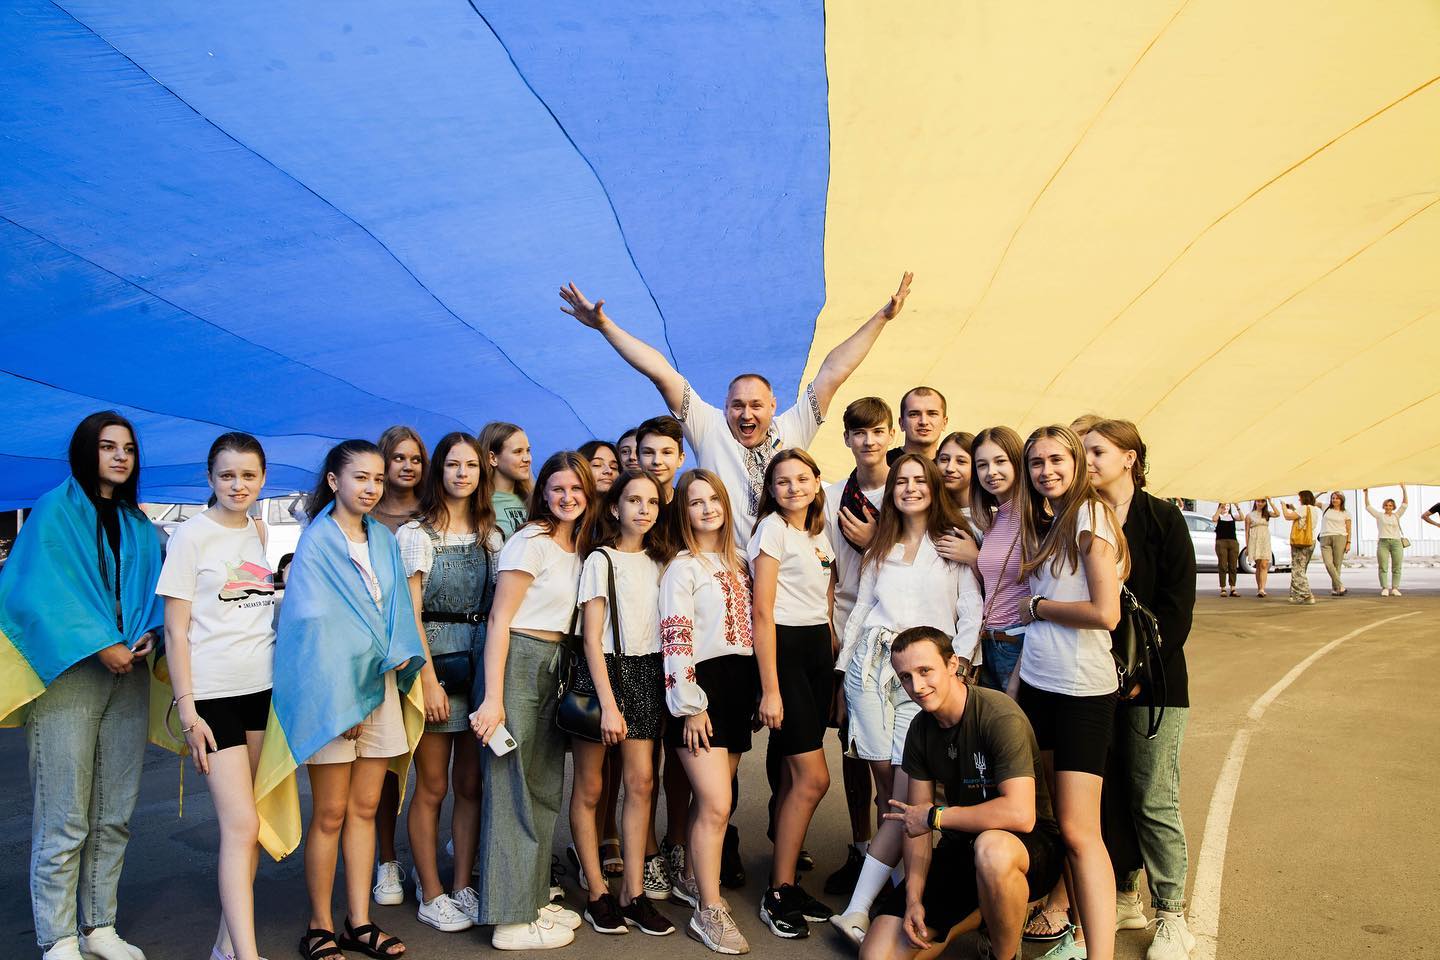 On the National Flag Day, the mayor and the community unfurled Ukraine’s largest blue and yellow flag in Zdolbuniv brought from the city of Donetsk